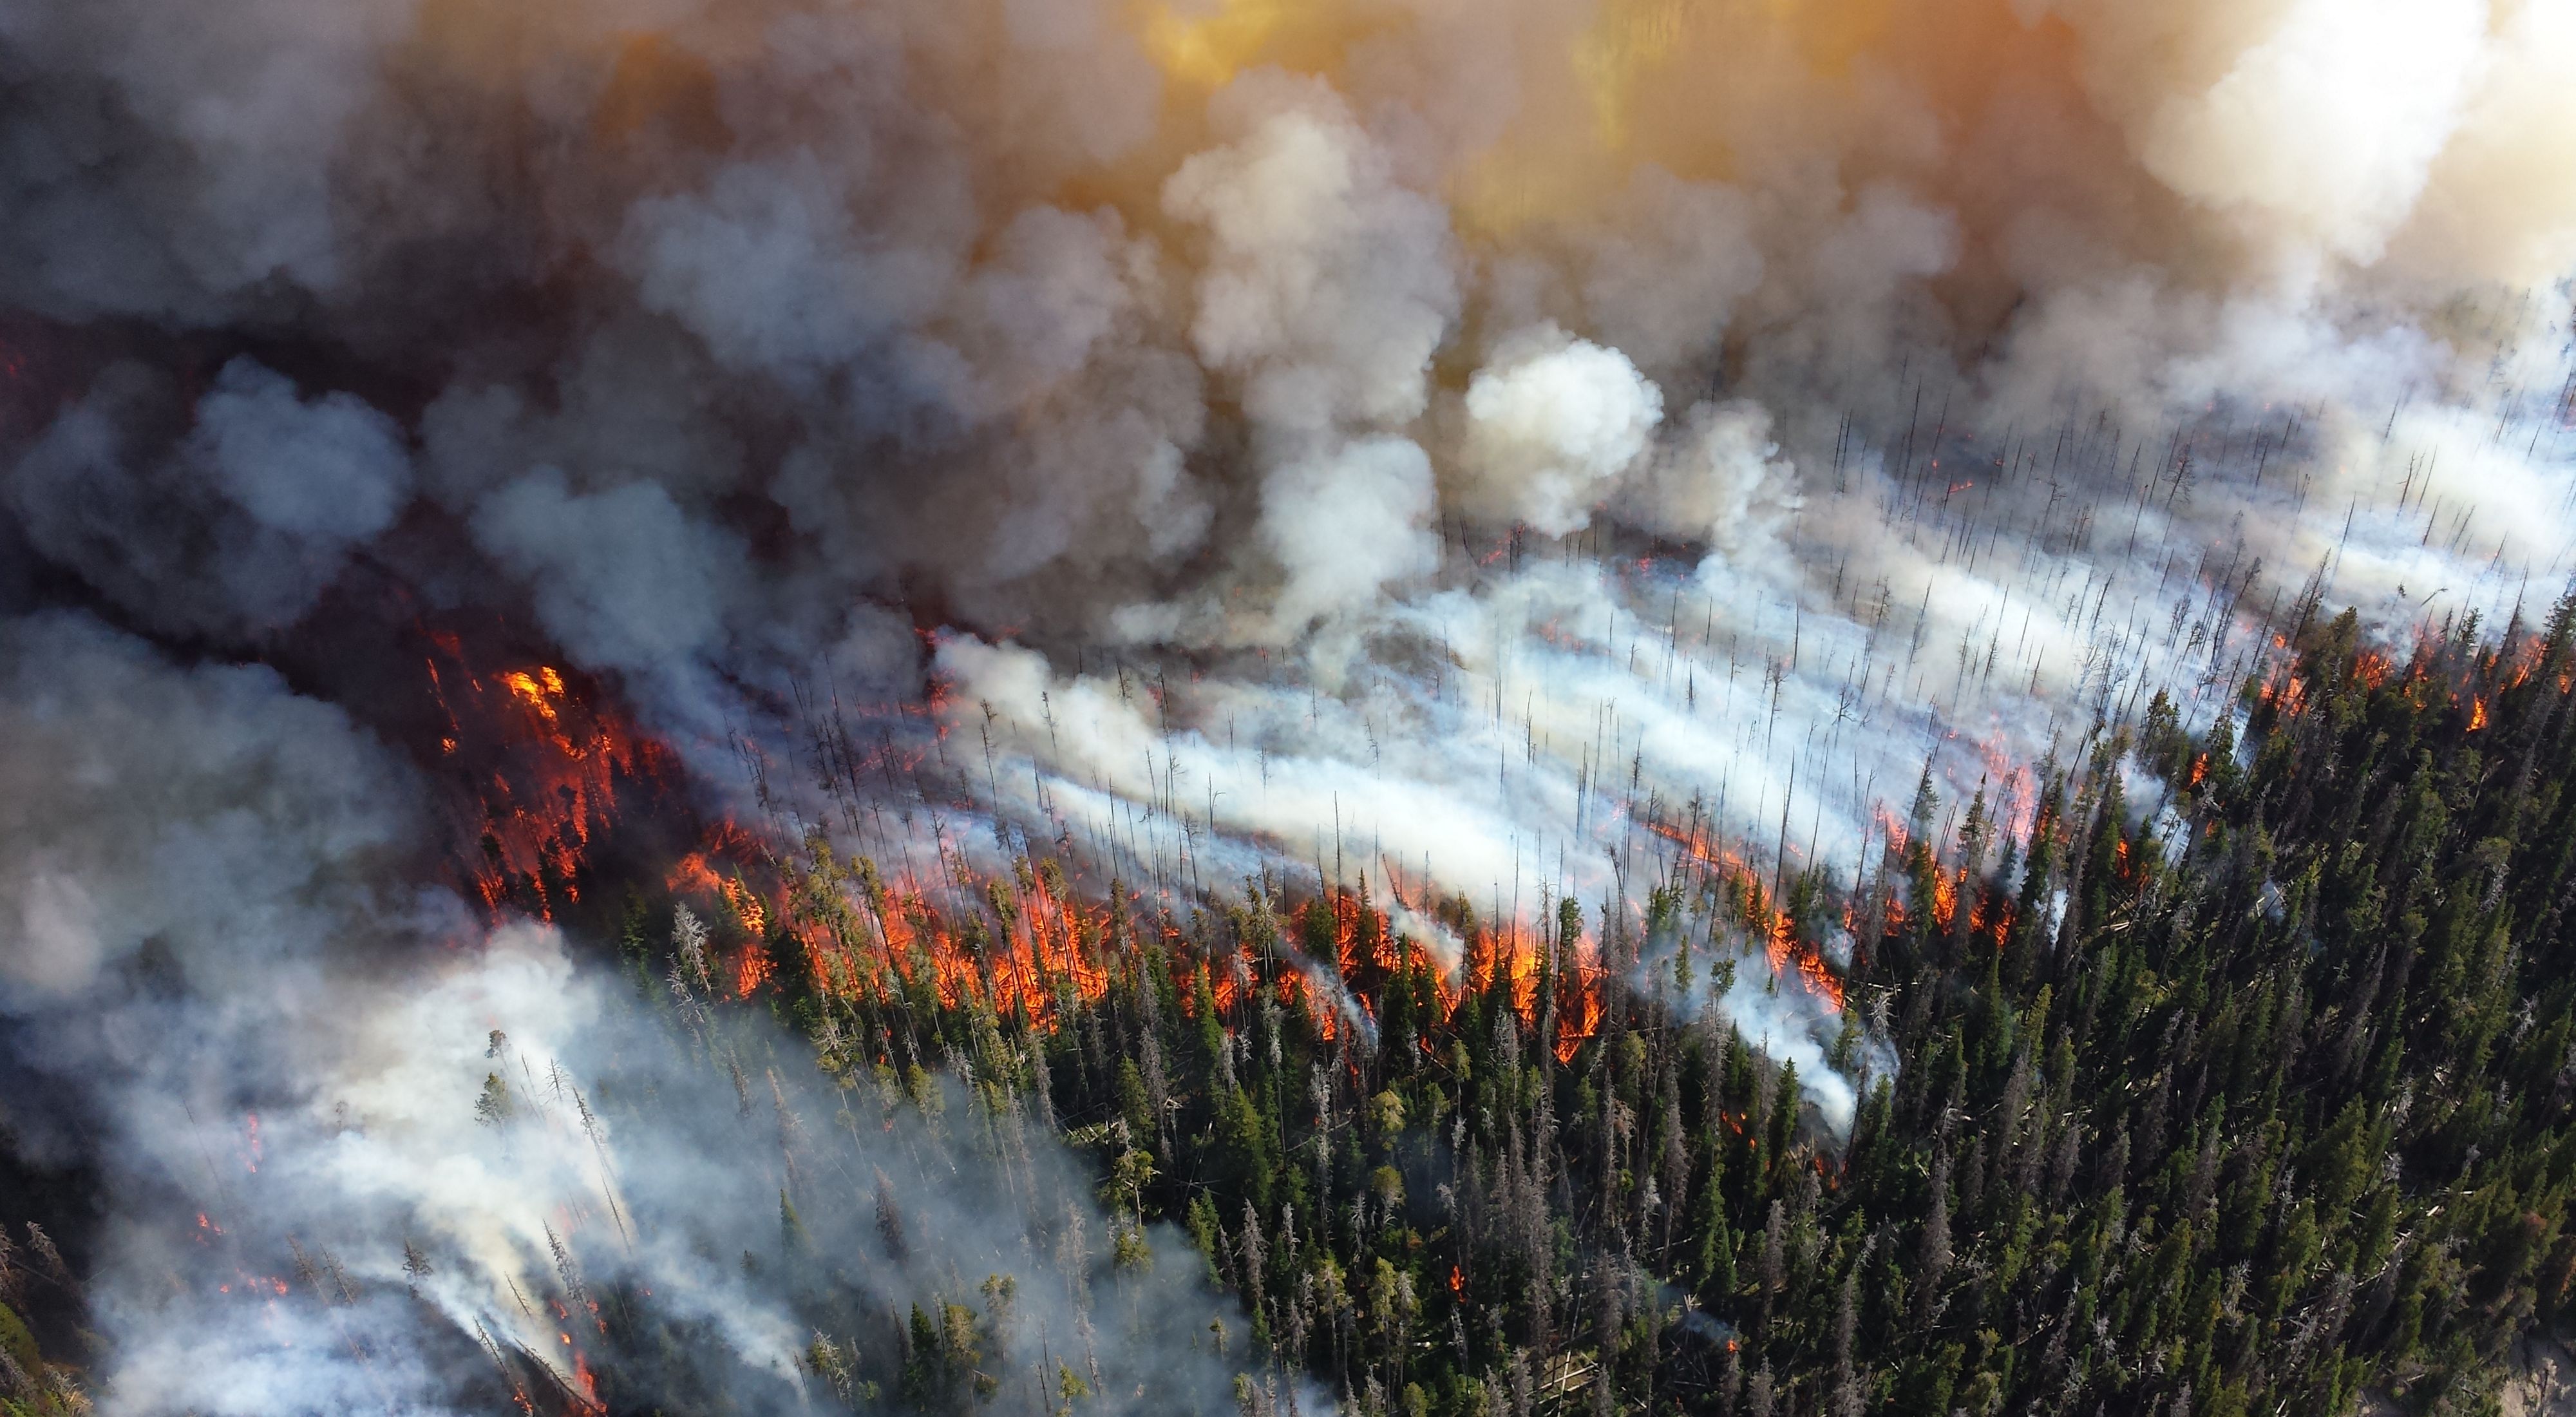 Aerial photo of a wildfire and smoke over Yellowstone National Park during the 2013 Alder Fire.